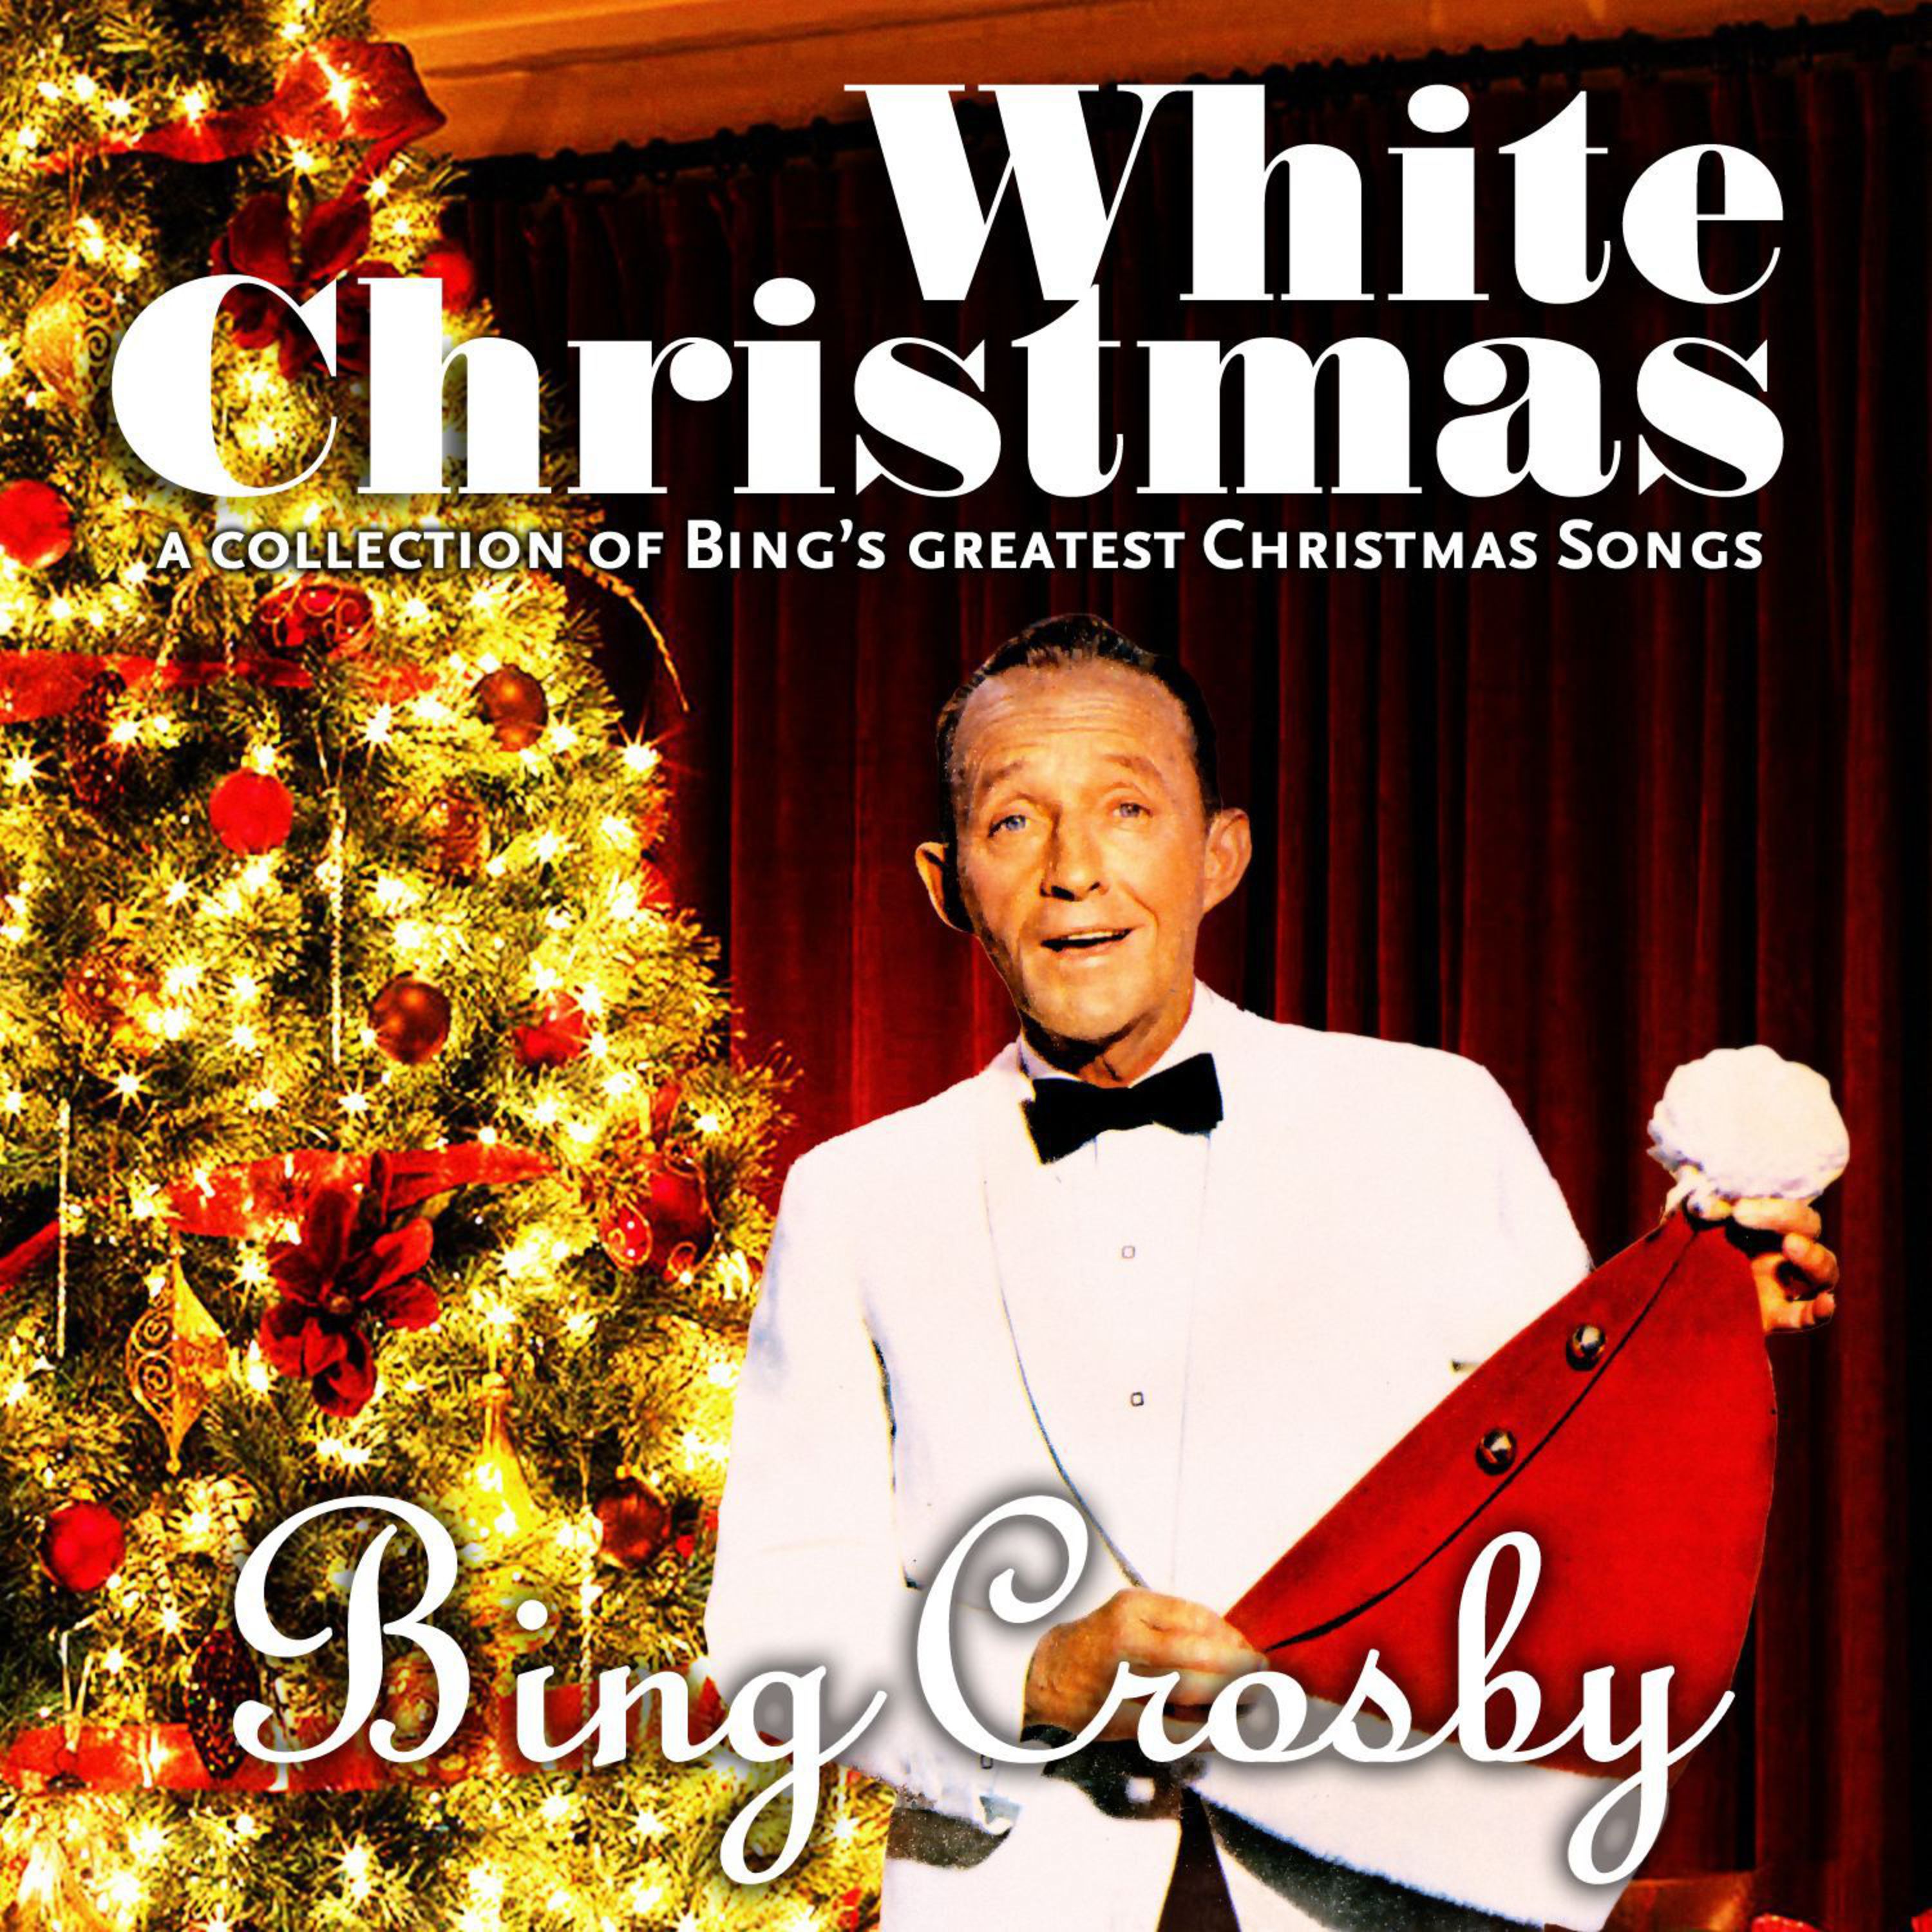 White Christmas (A Collection of Bing's Greatest Christmas Songs)